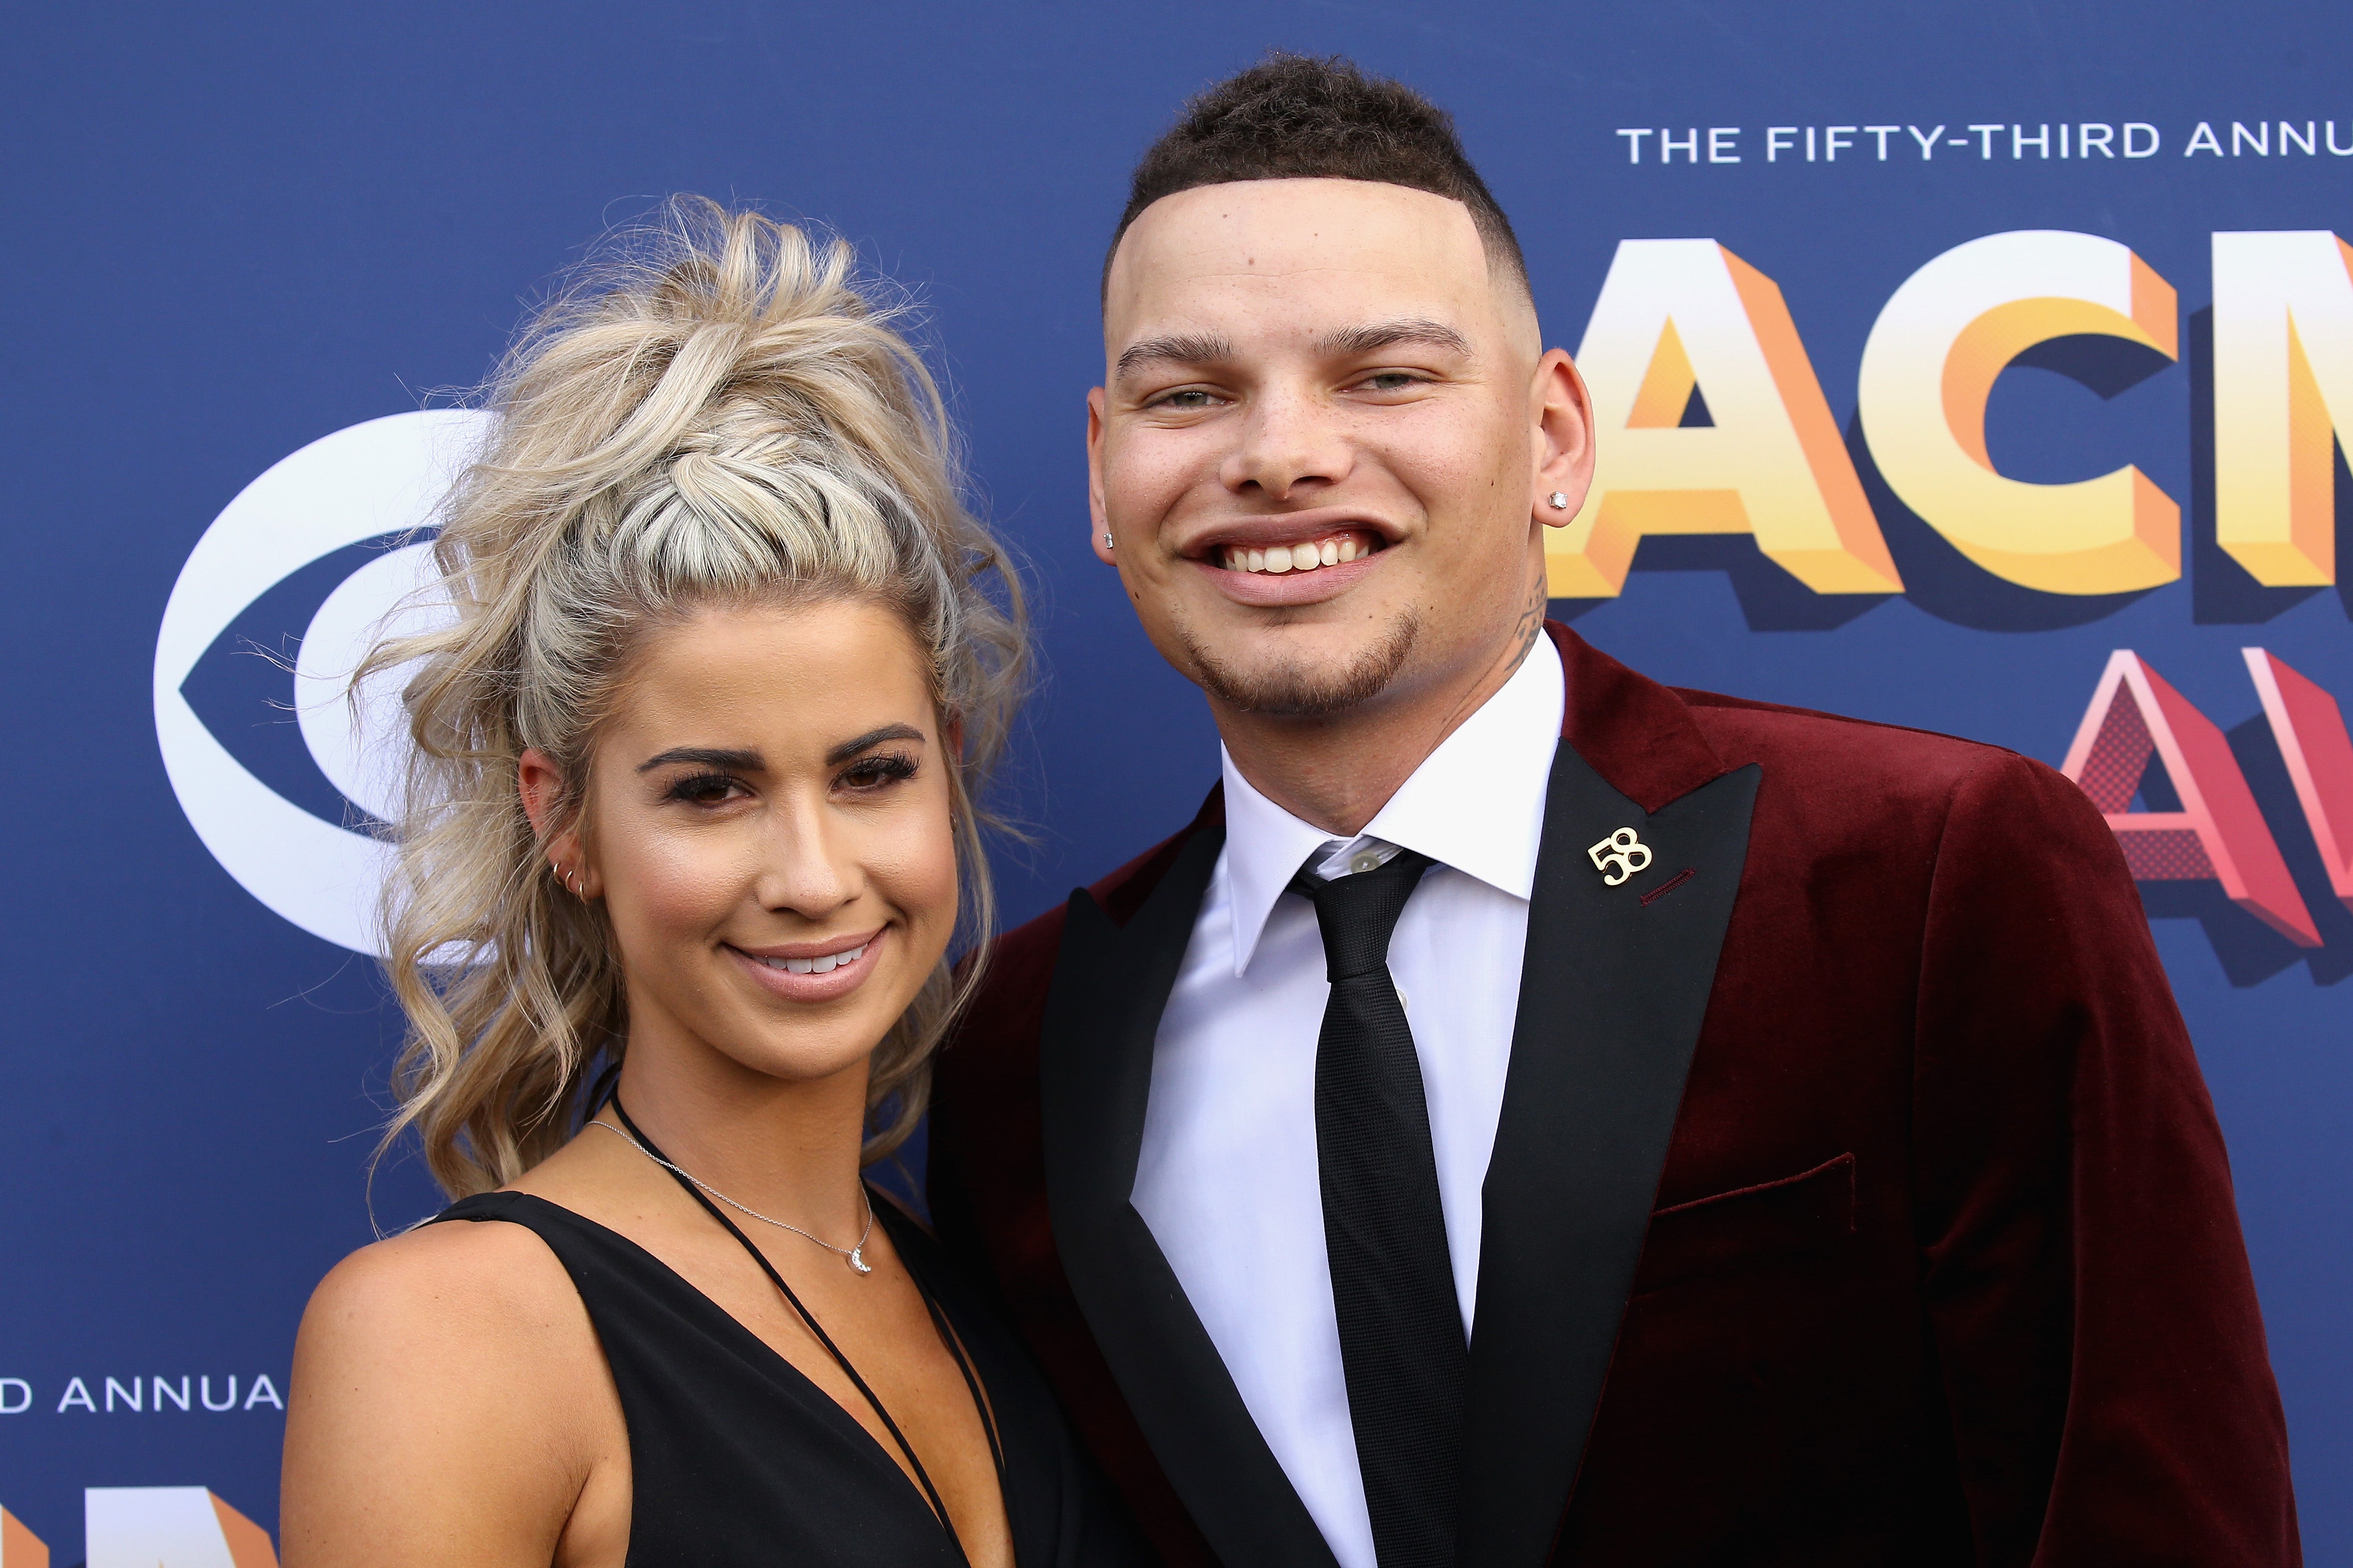 Who Is Kane Brown's Wife? All About Katelyn Jae Brown